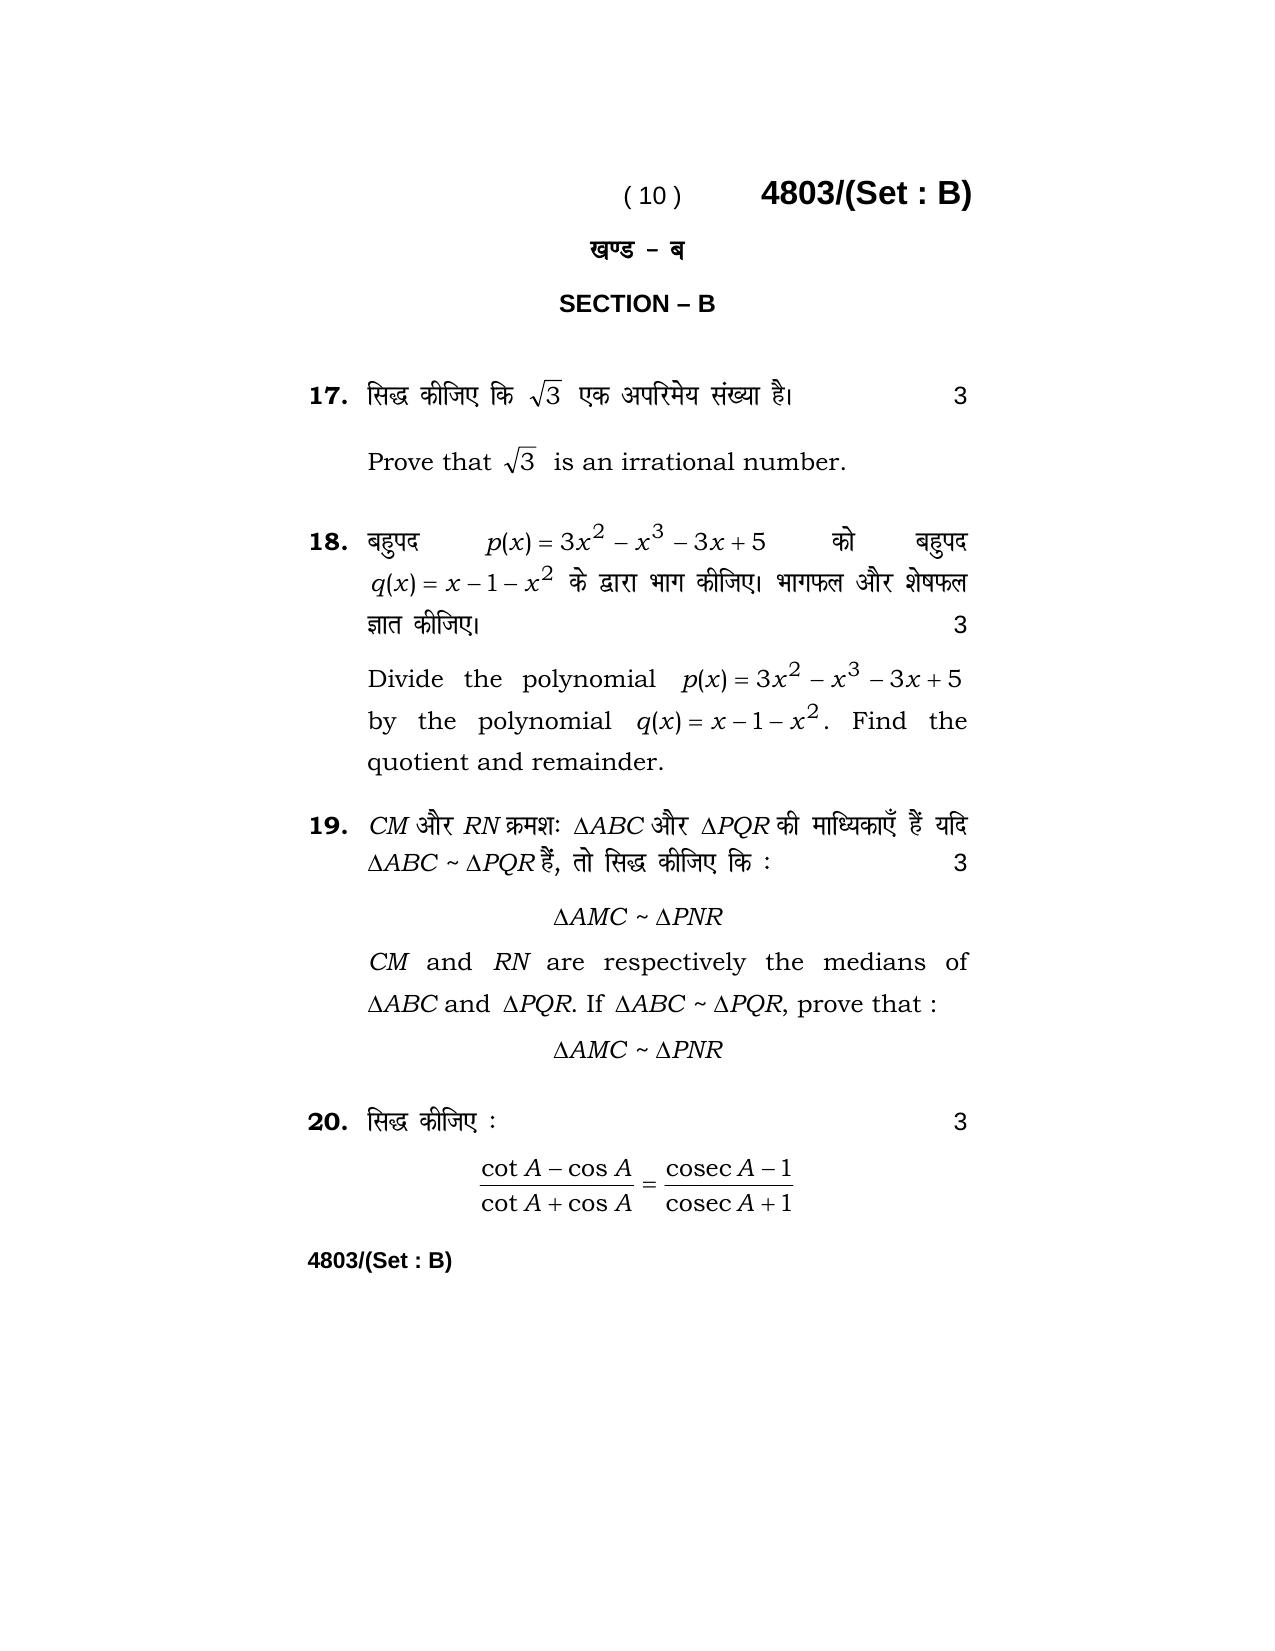 Haryana Board HBSE Class 10 Mathematics 2020 Question Paper - Page 26